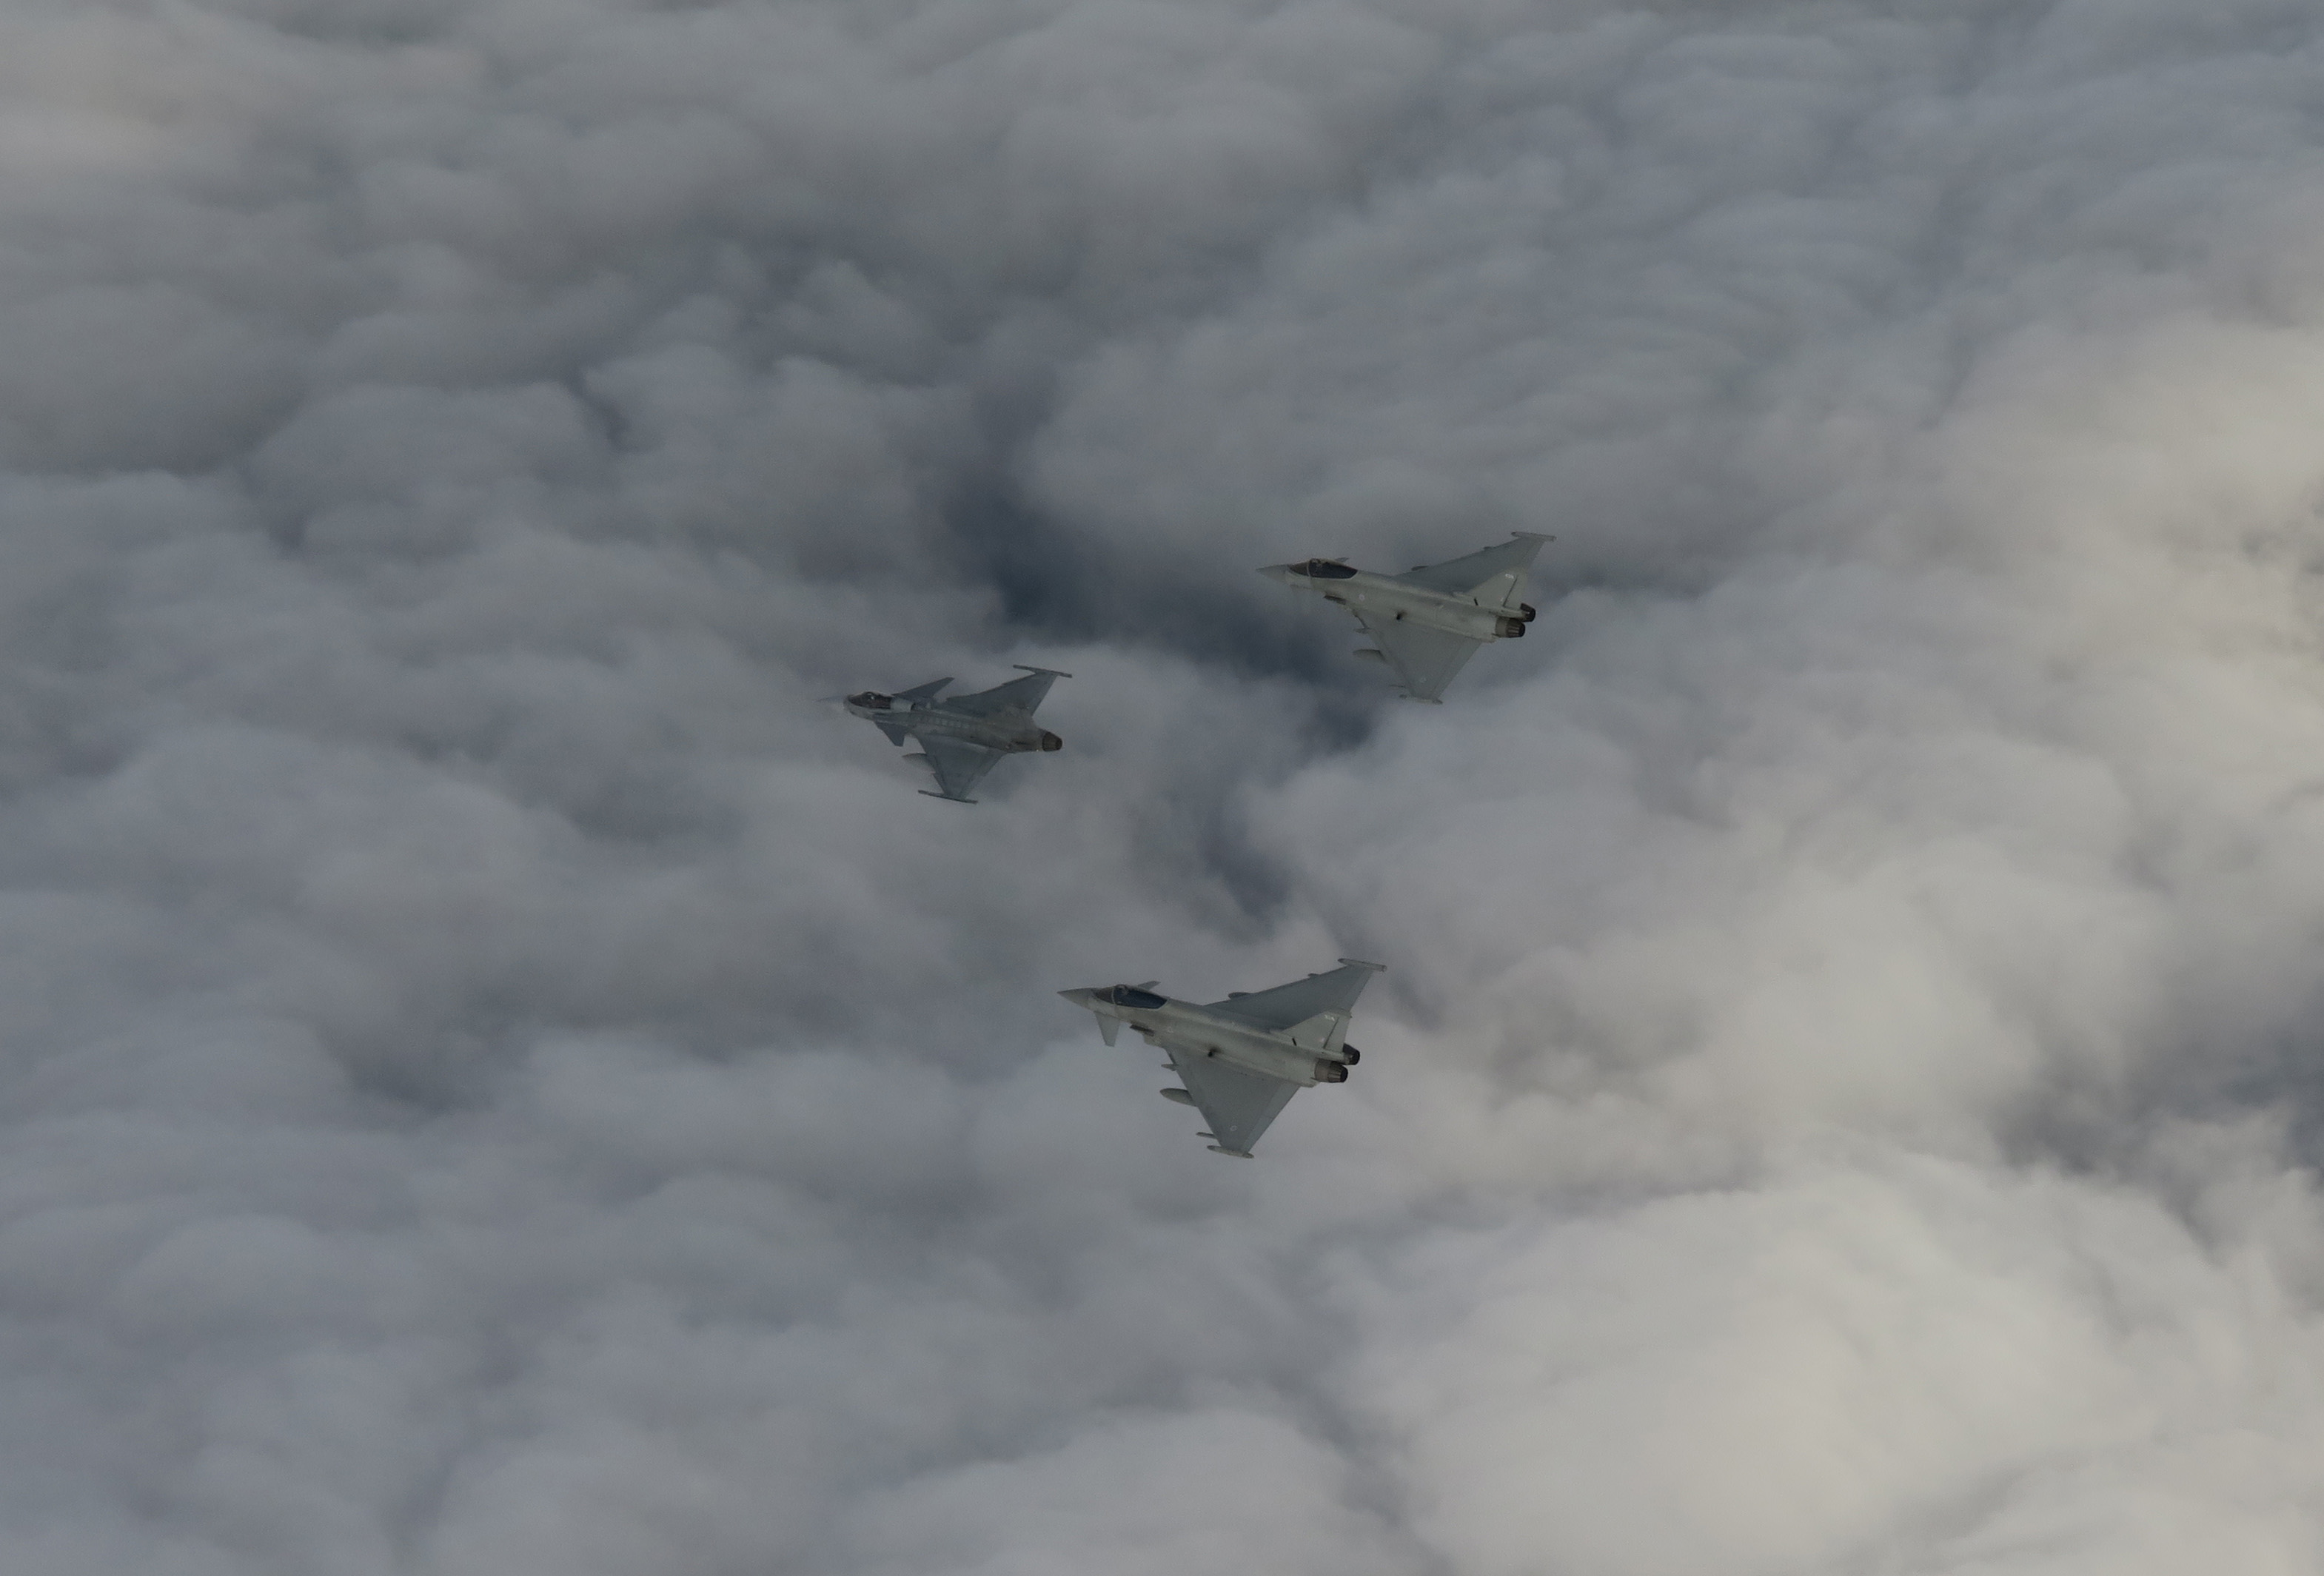 Image shows three Typhoons flying through the clouds in formation.